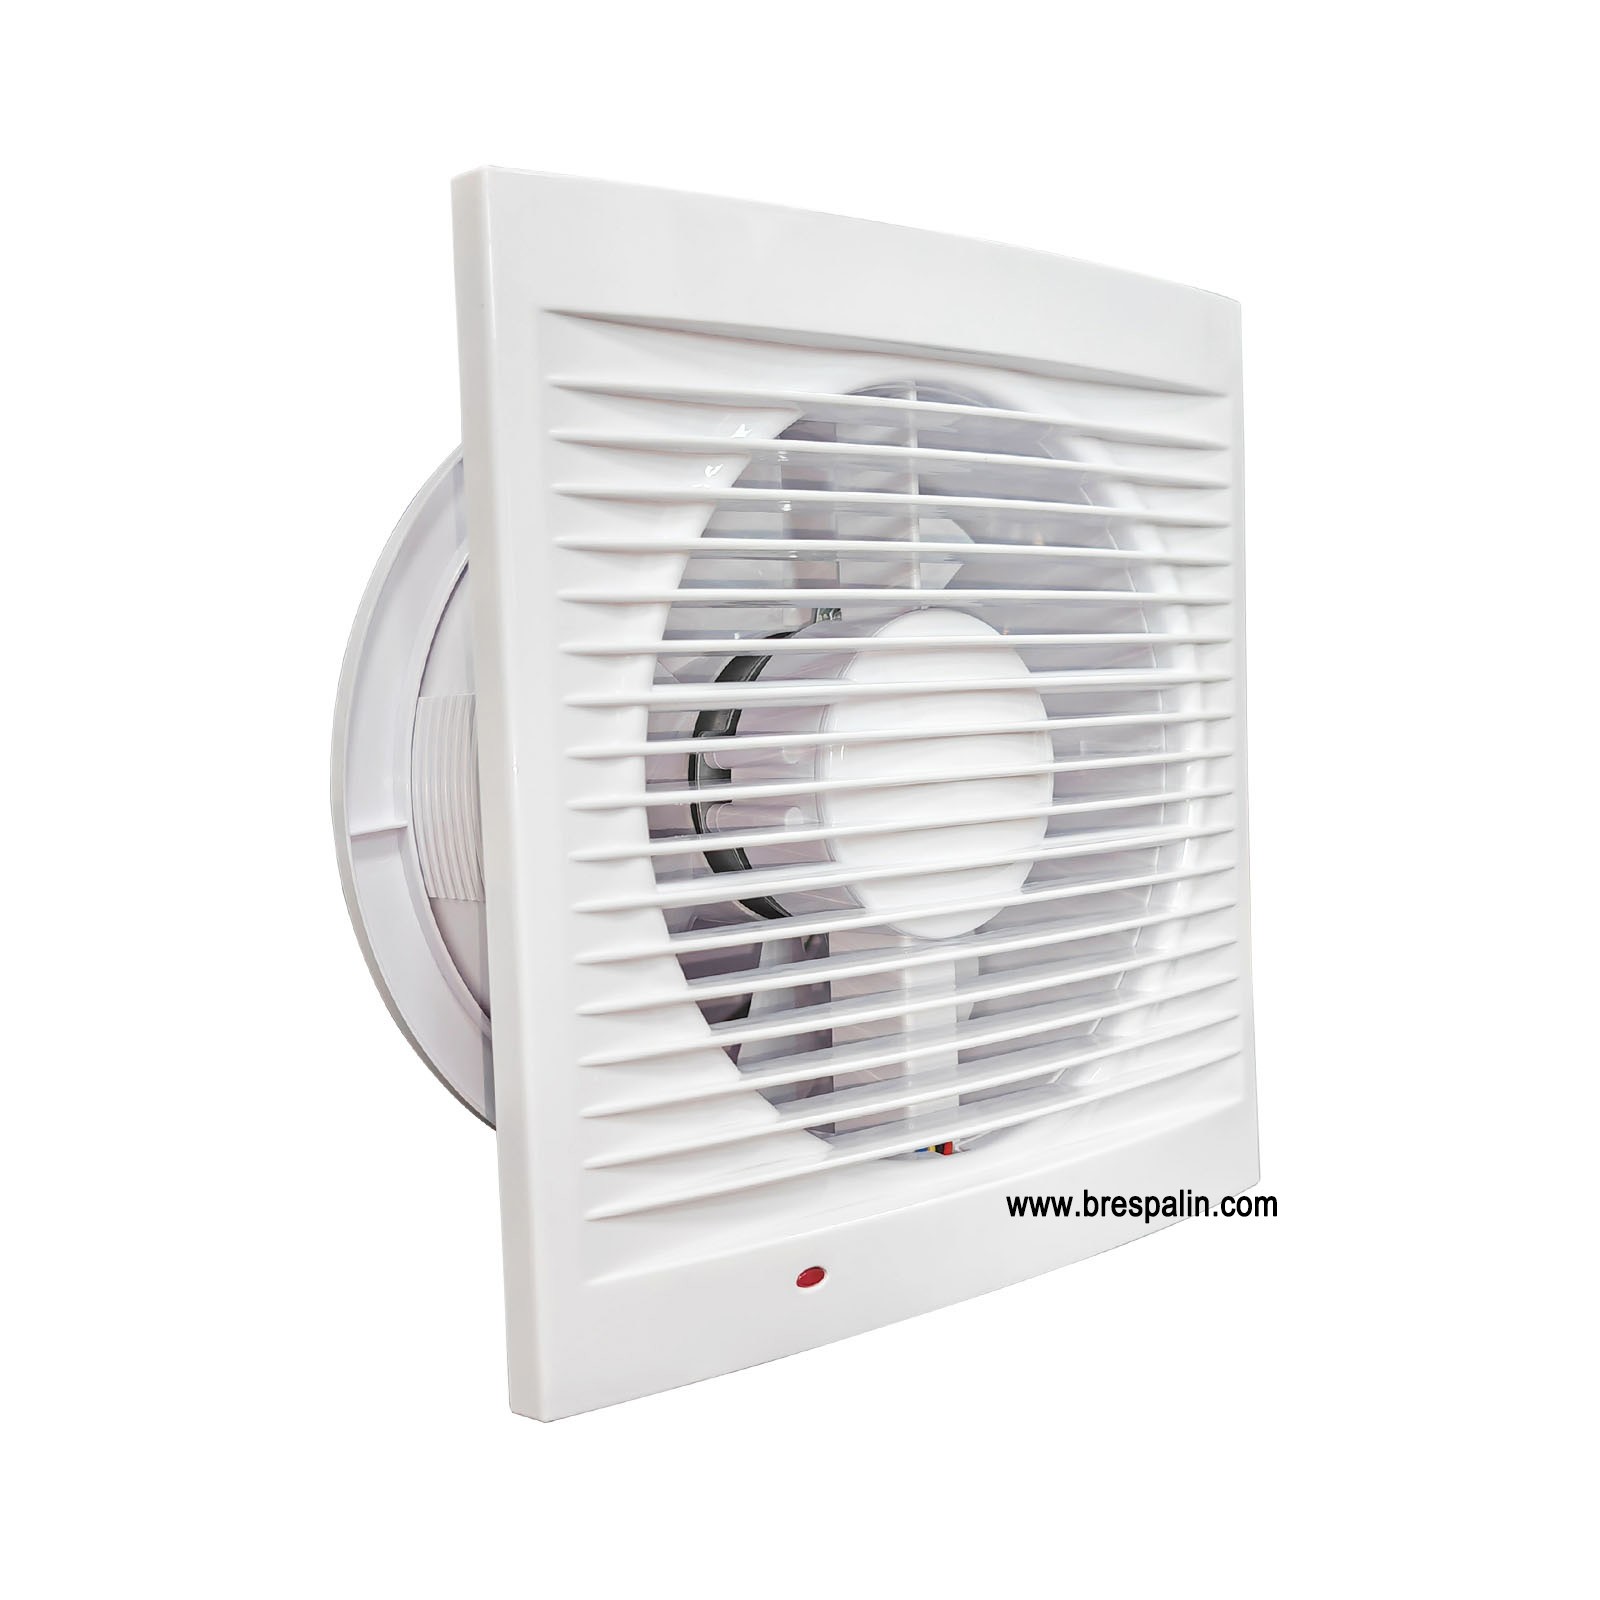 Air extractor Exhaust Fan with Shutter for Bathroom and Smoke room -  Wall/Window Exhaust Fan - BRESPALIN CO., LTD.